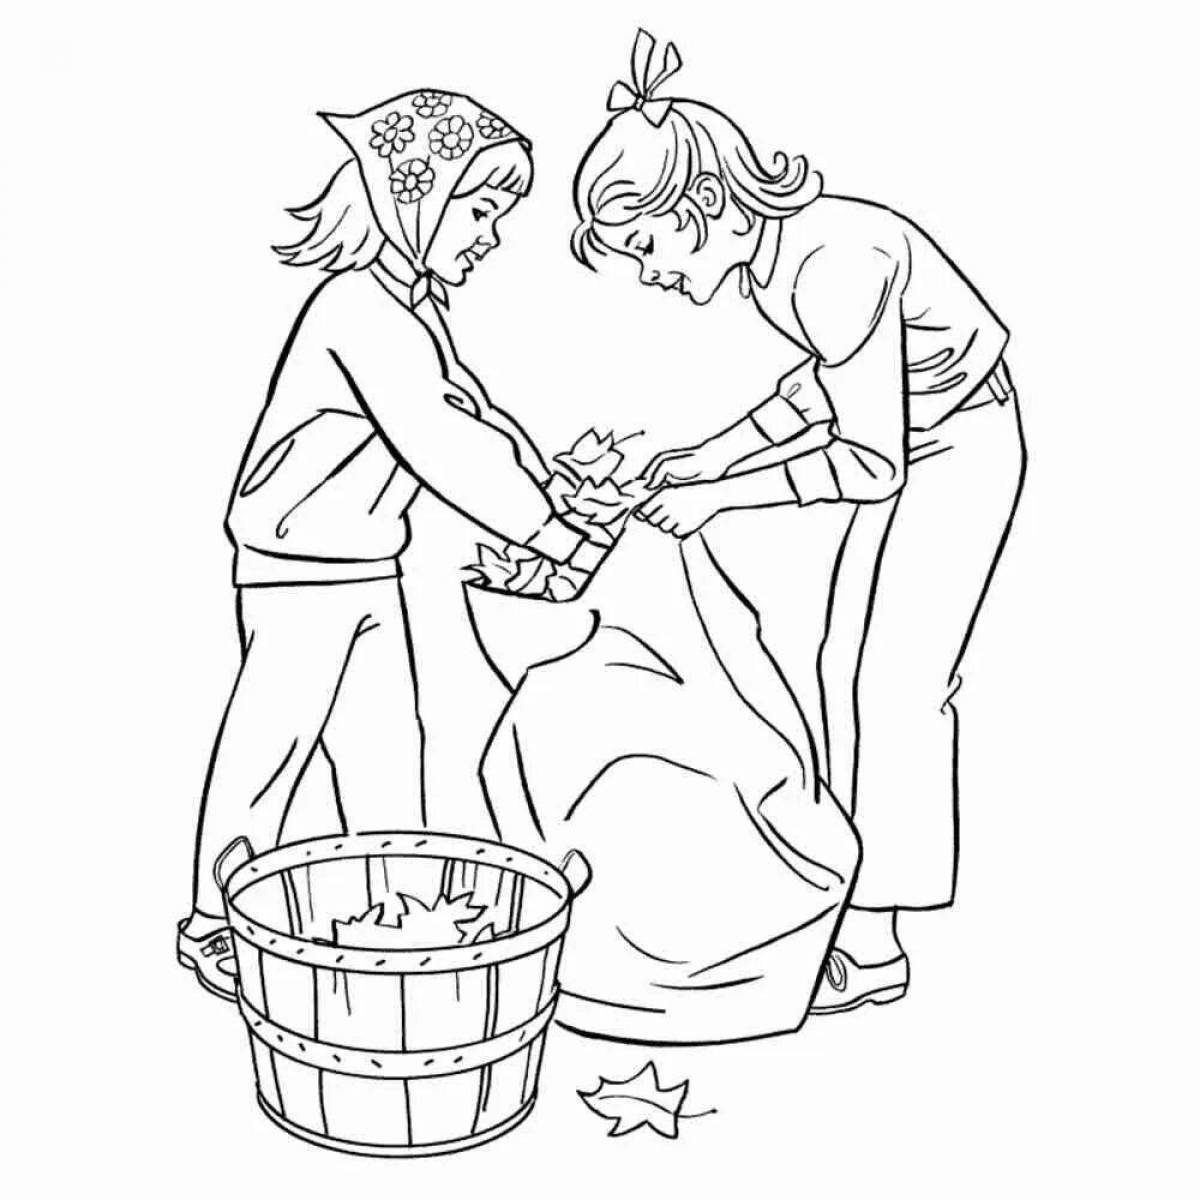 Love good deeds coloring page